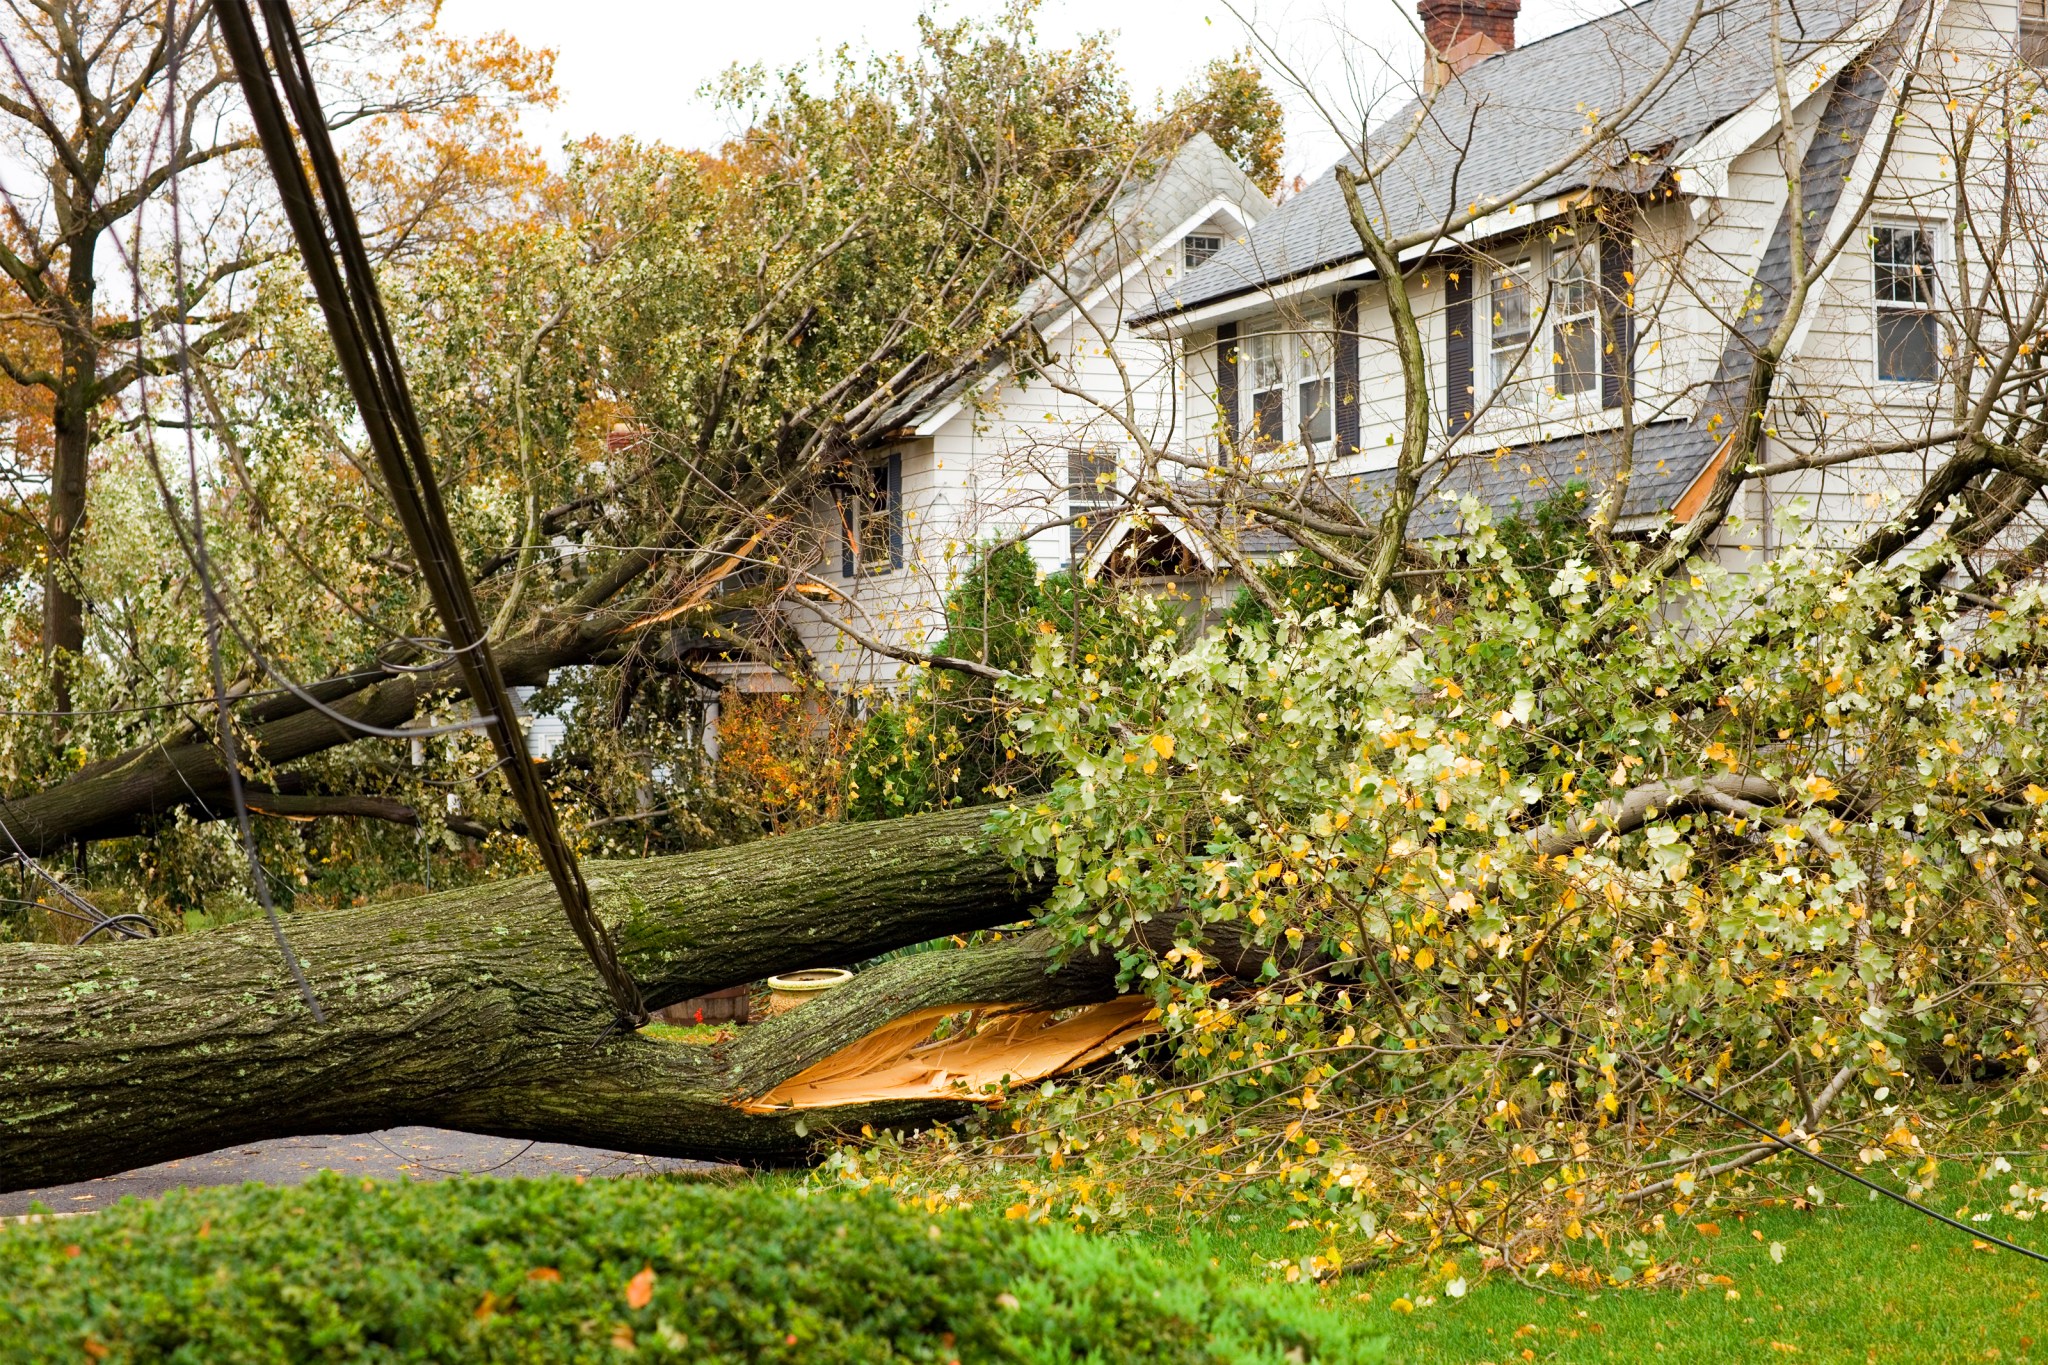 Trees toppled against white two-story homes following storm